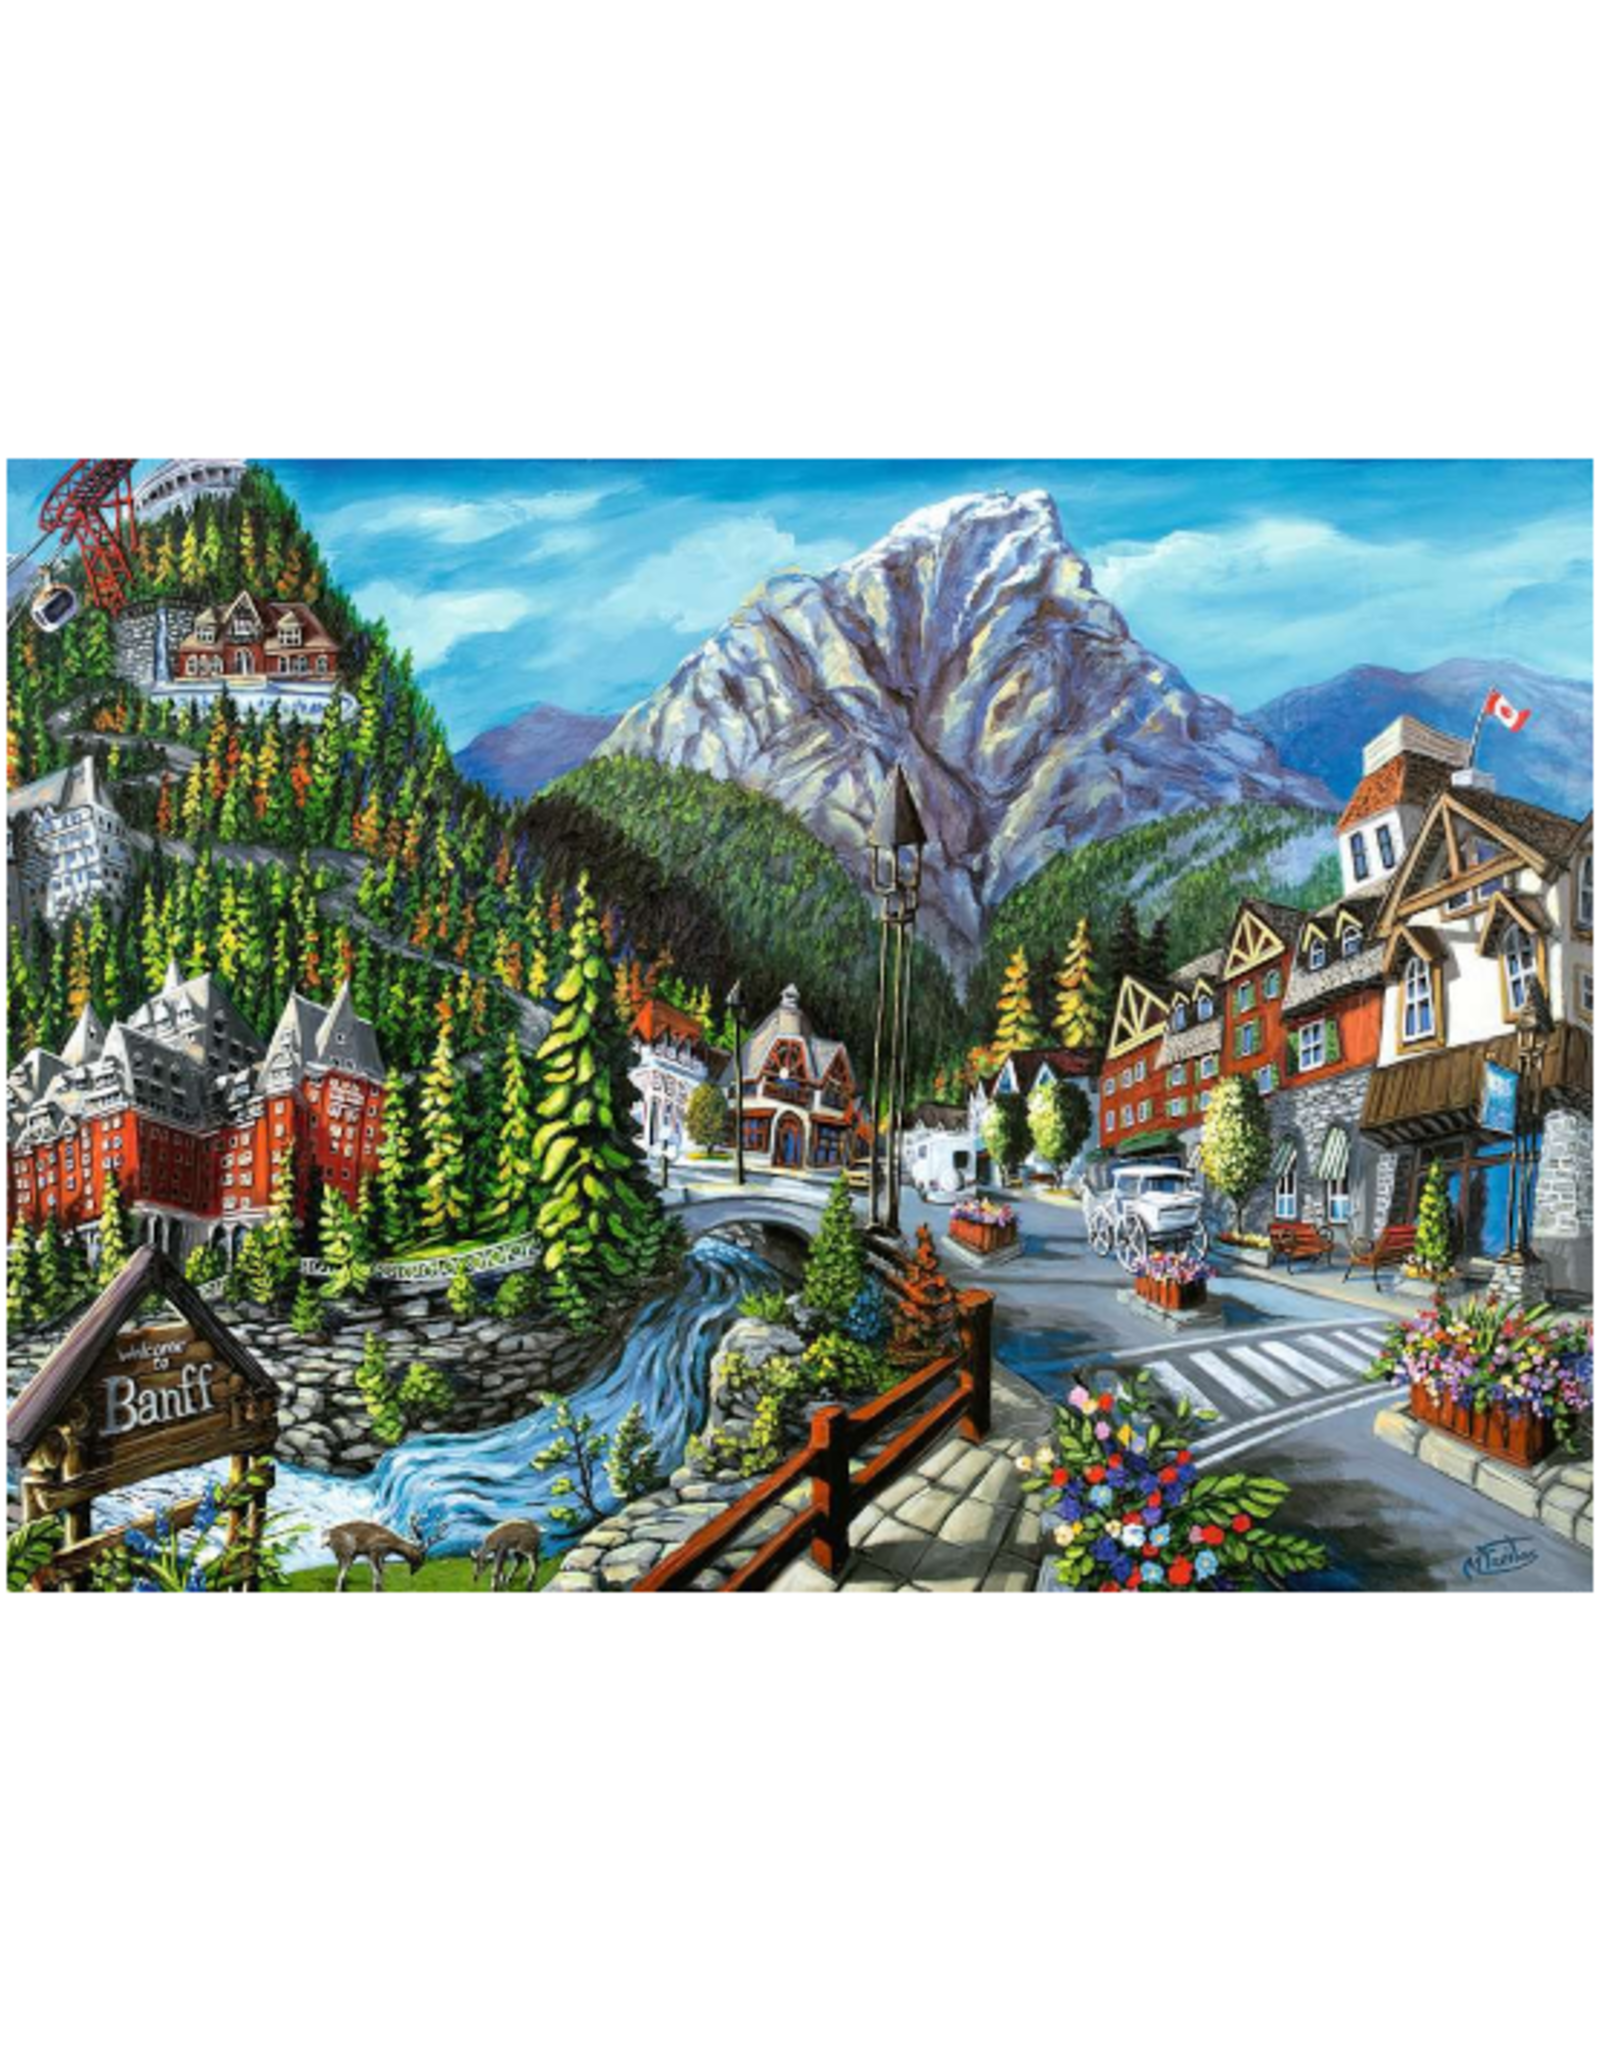 Ravensburger Ravensburger - 1000 pcs - Canadian Collection: Welcome to Banff